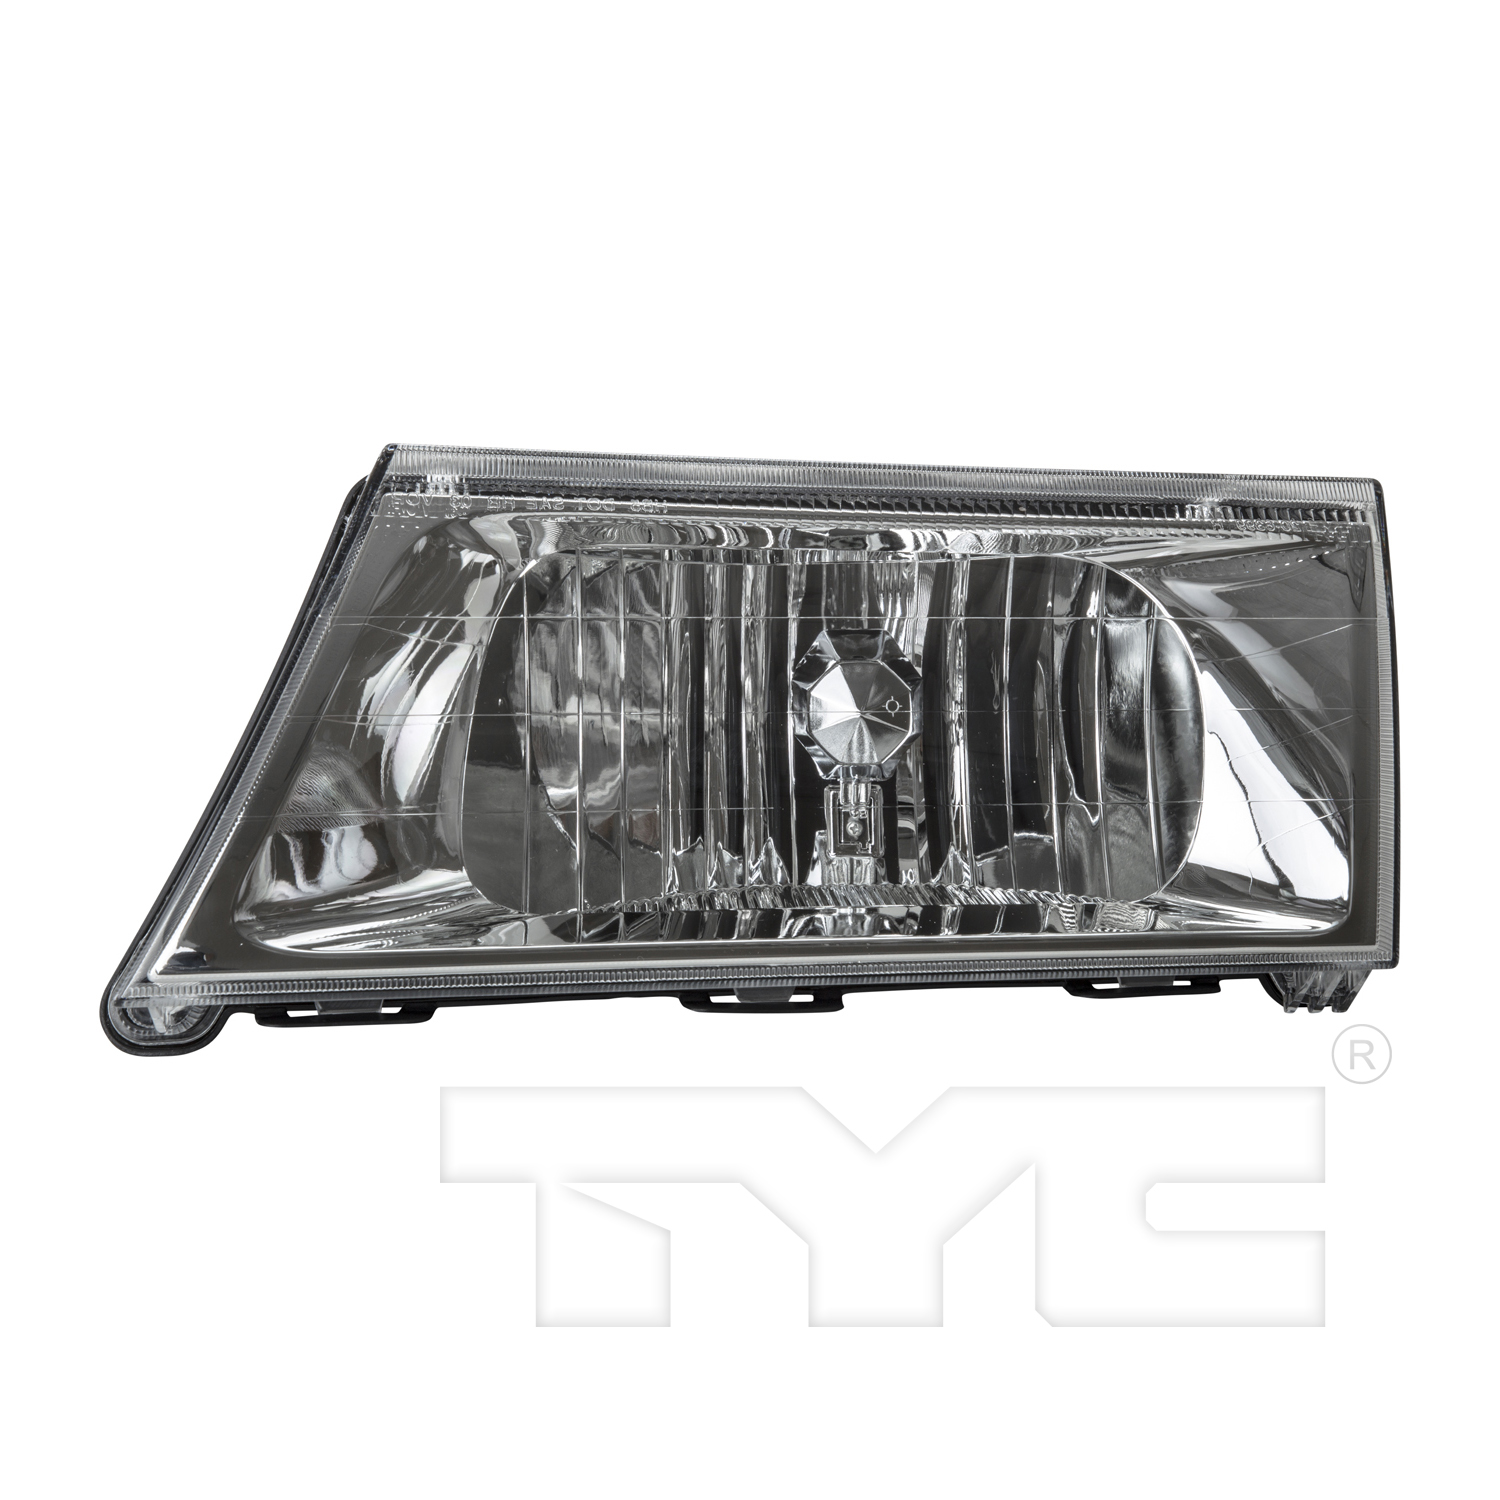 Aftermarket HEADLIGHTS for MERCURY - GRAND MARQUIS, GRAND MARQUIS,03-04,LT Headlamp assy composite